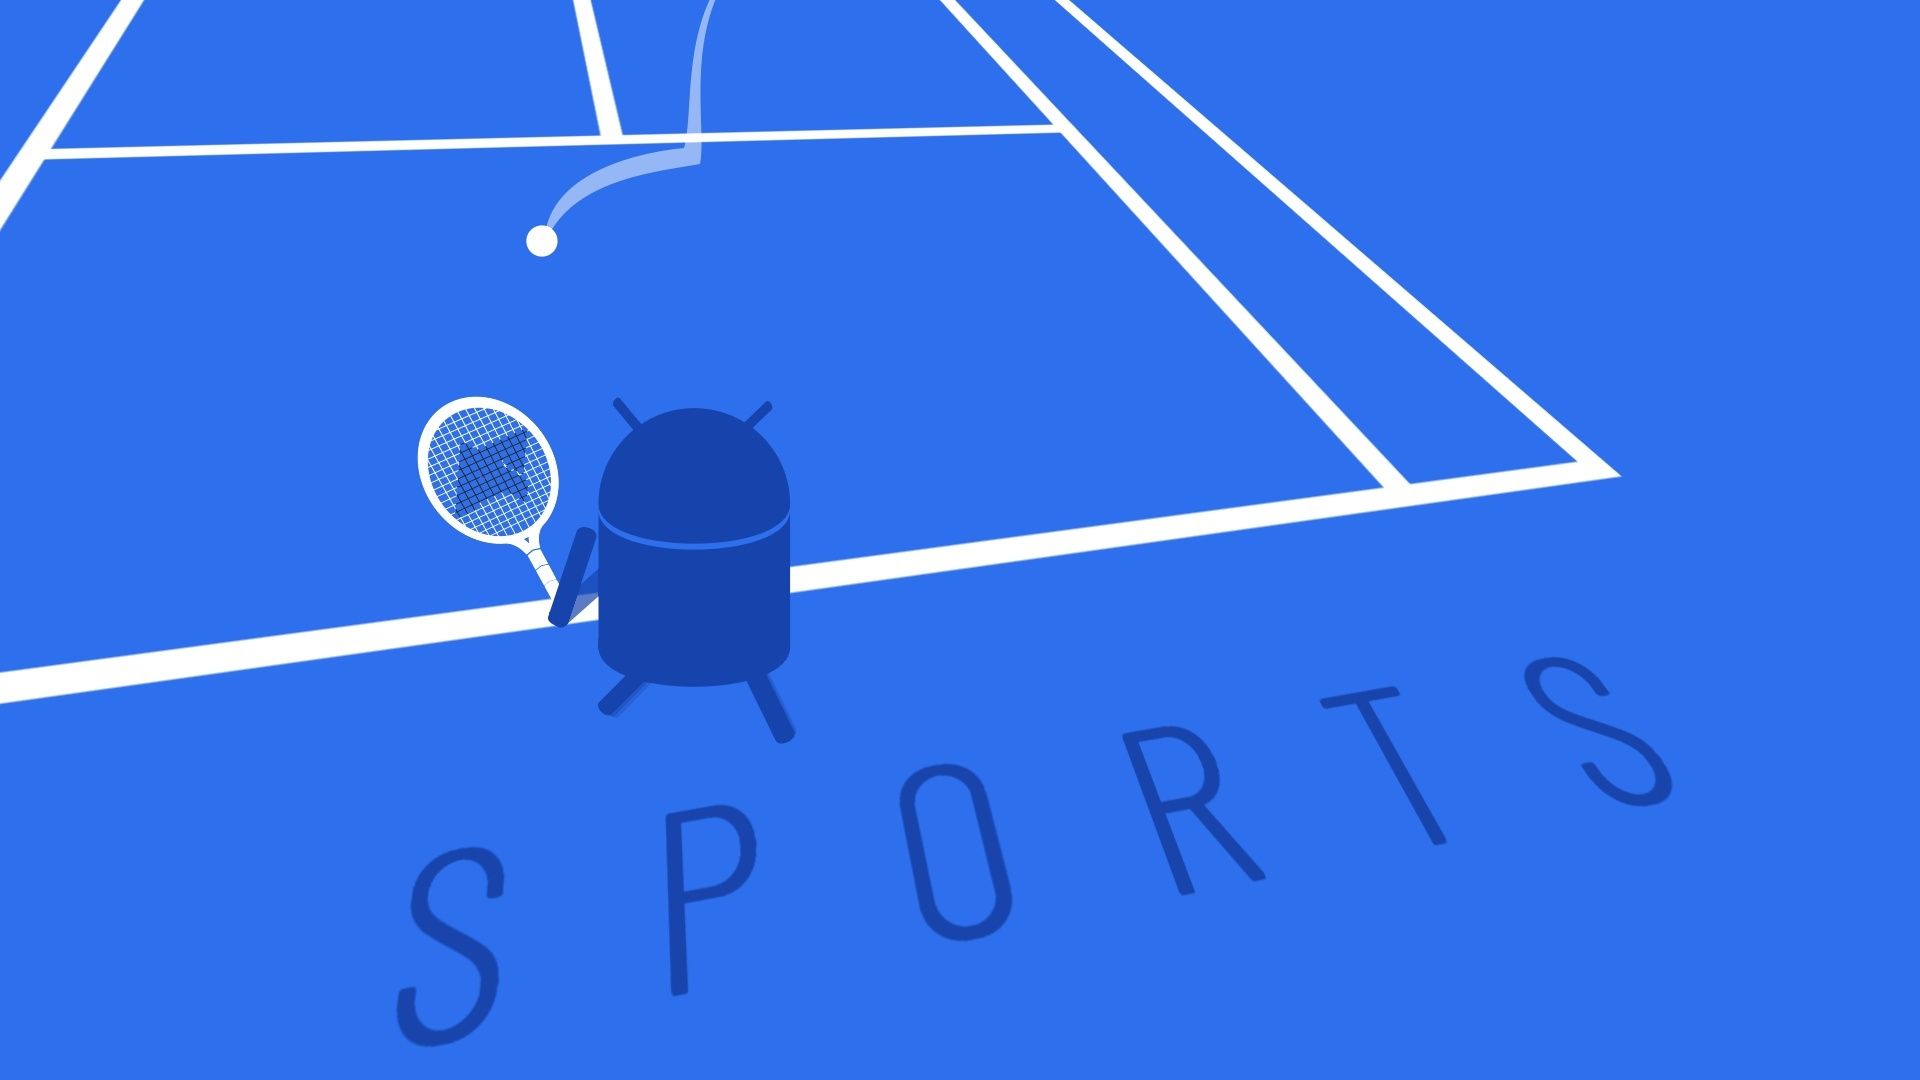 Best Sports Games to Play on Chromebook